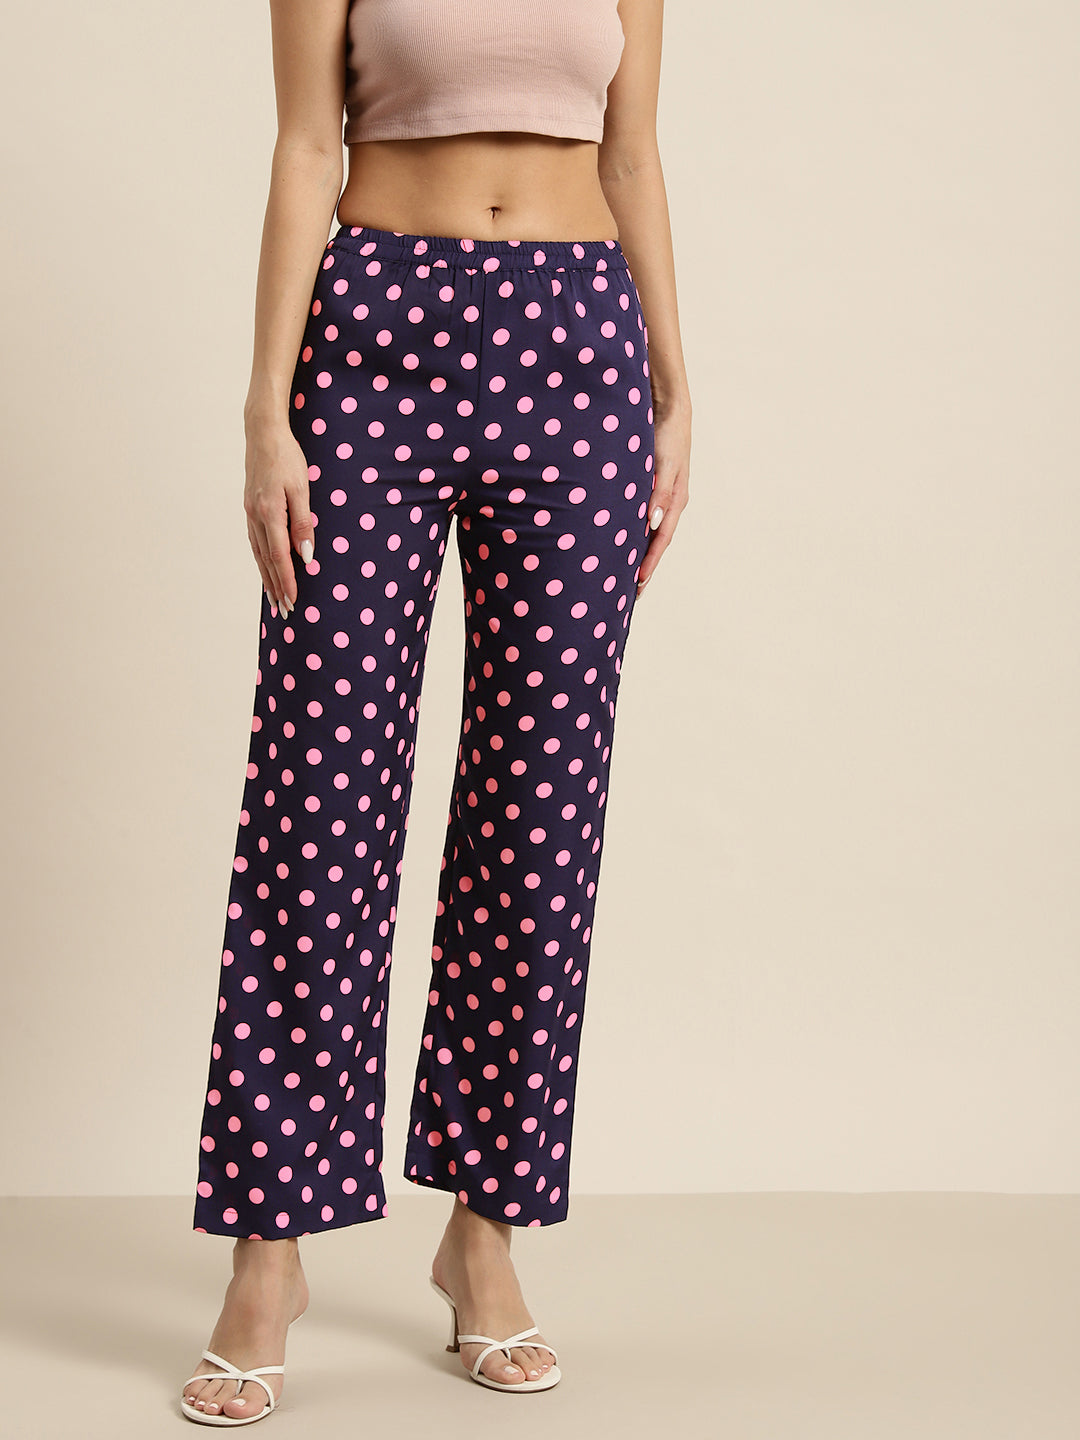 Navy and pink polka dot trousers